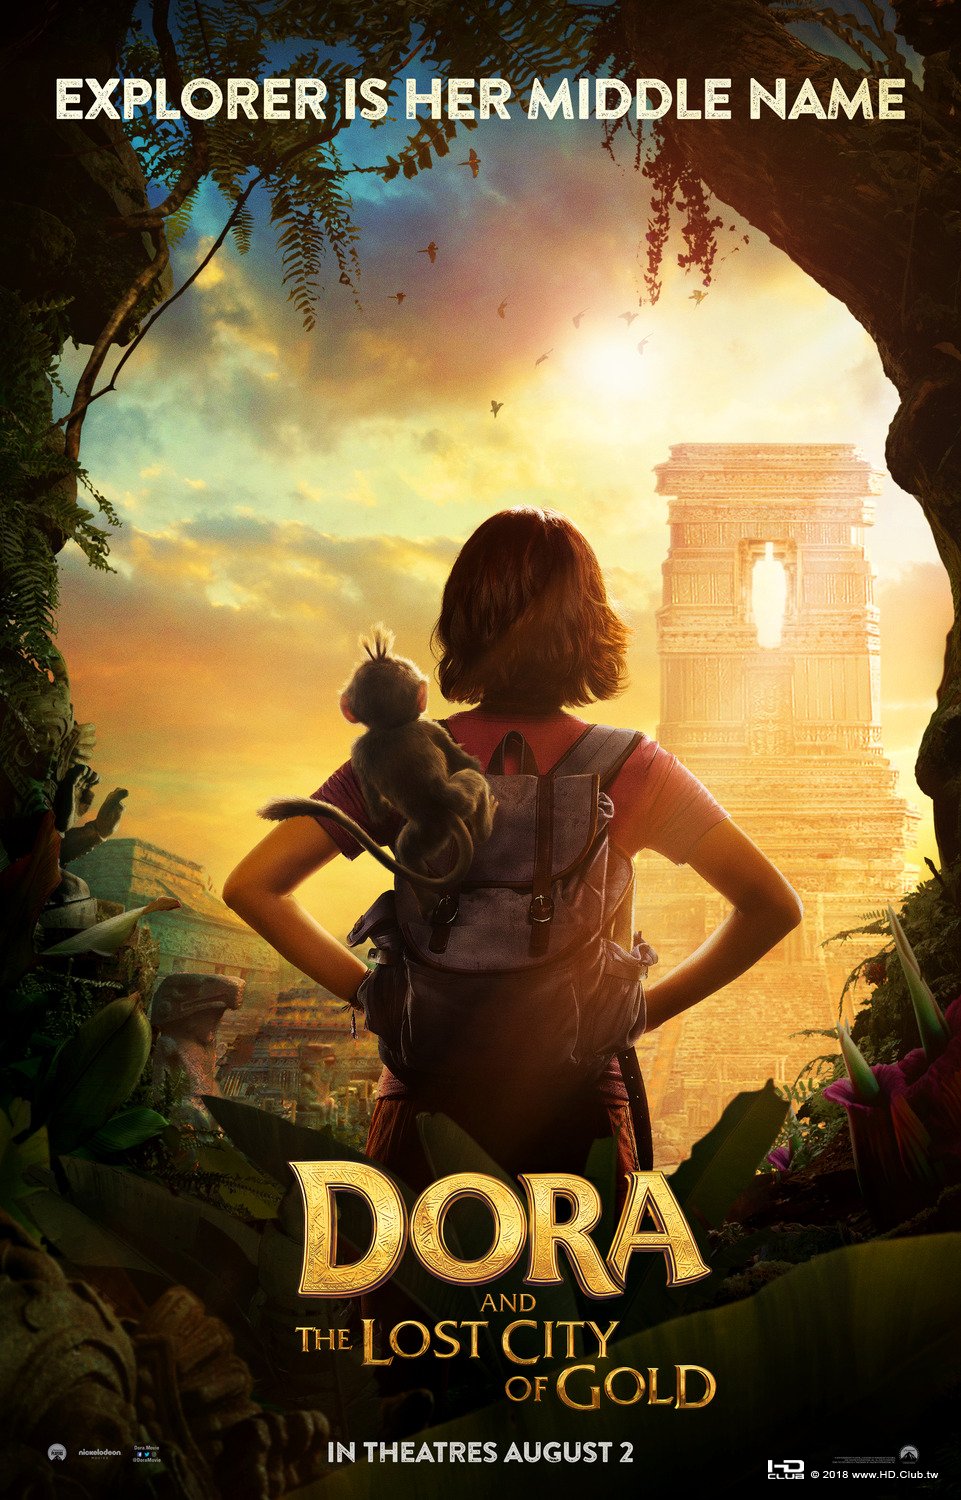 dora_and_the_lost_city_of_gold_xlg.jpg